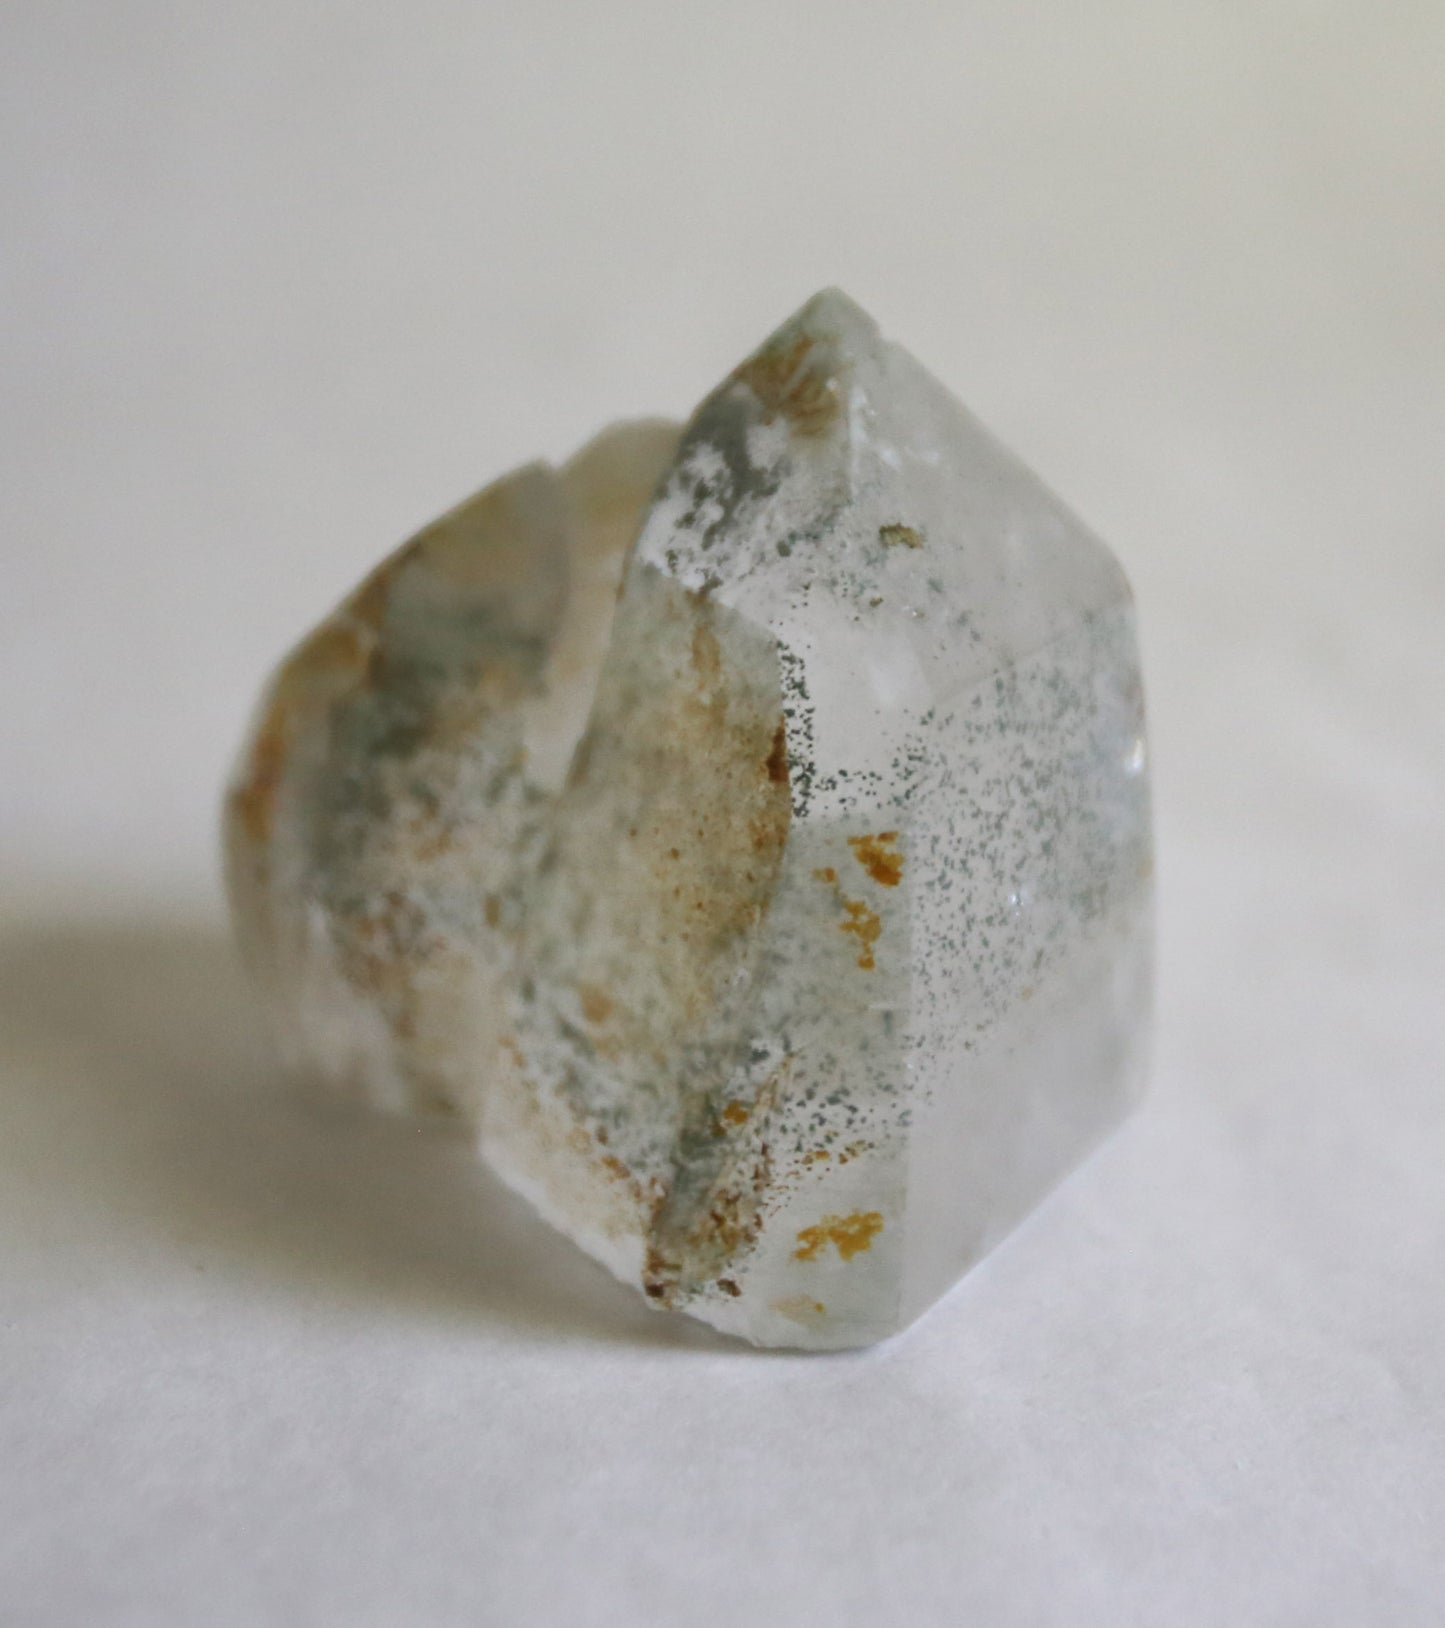 Chlorite Quartz Tower with Four Facets